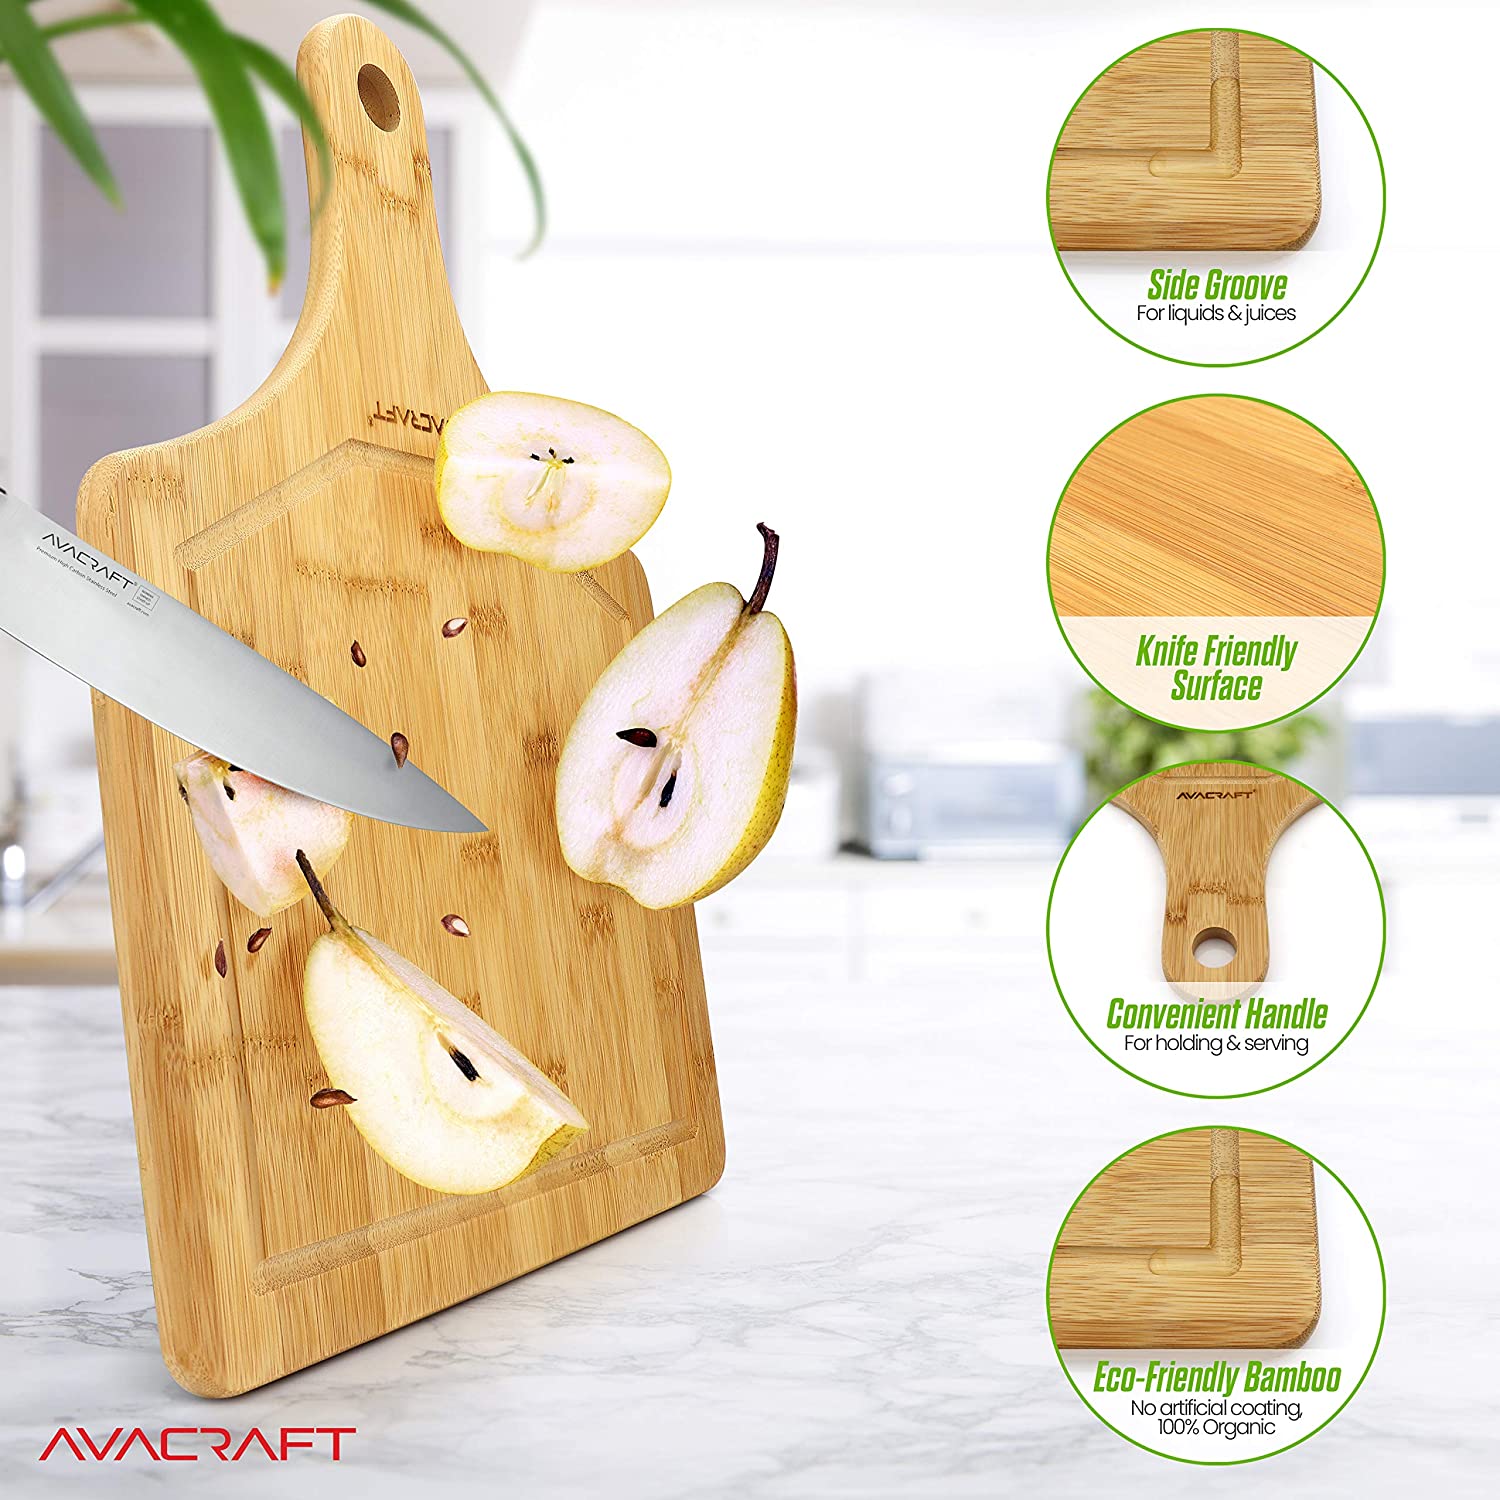 AVACRAFT Organic Bamboo Cutting Board with Handle, Wood Serving Board, Ideal Cutting Board for Cheese, Herbs (17X12 with Handle)